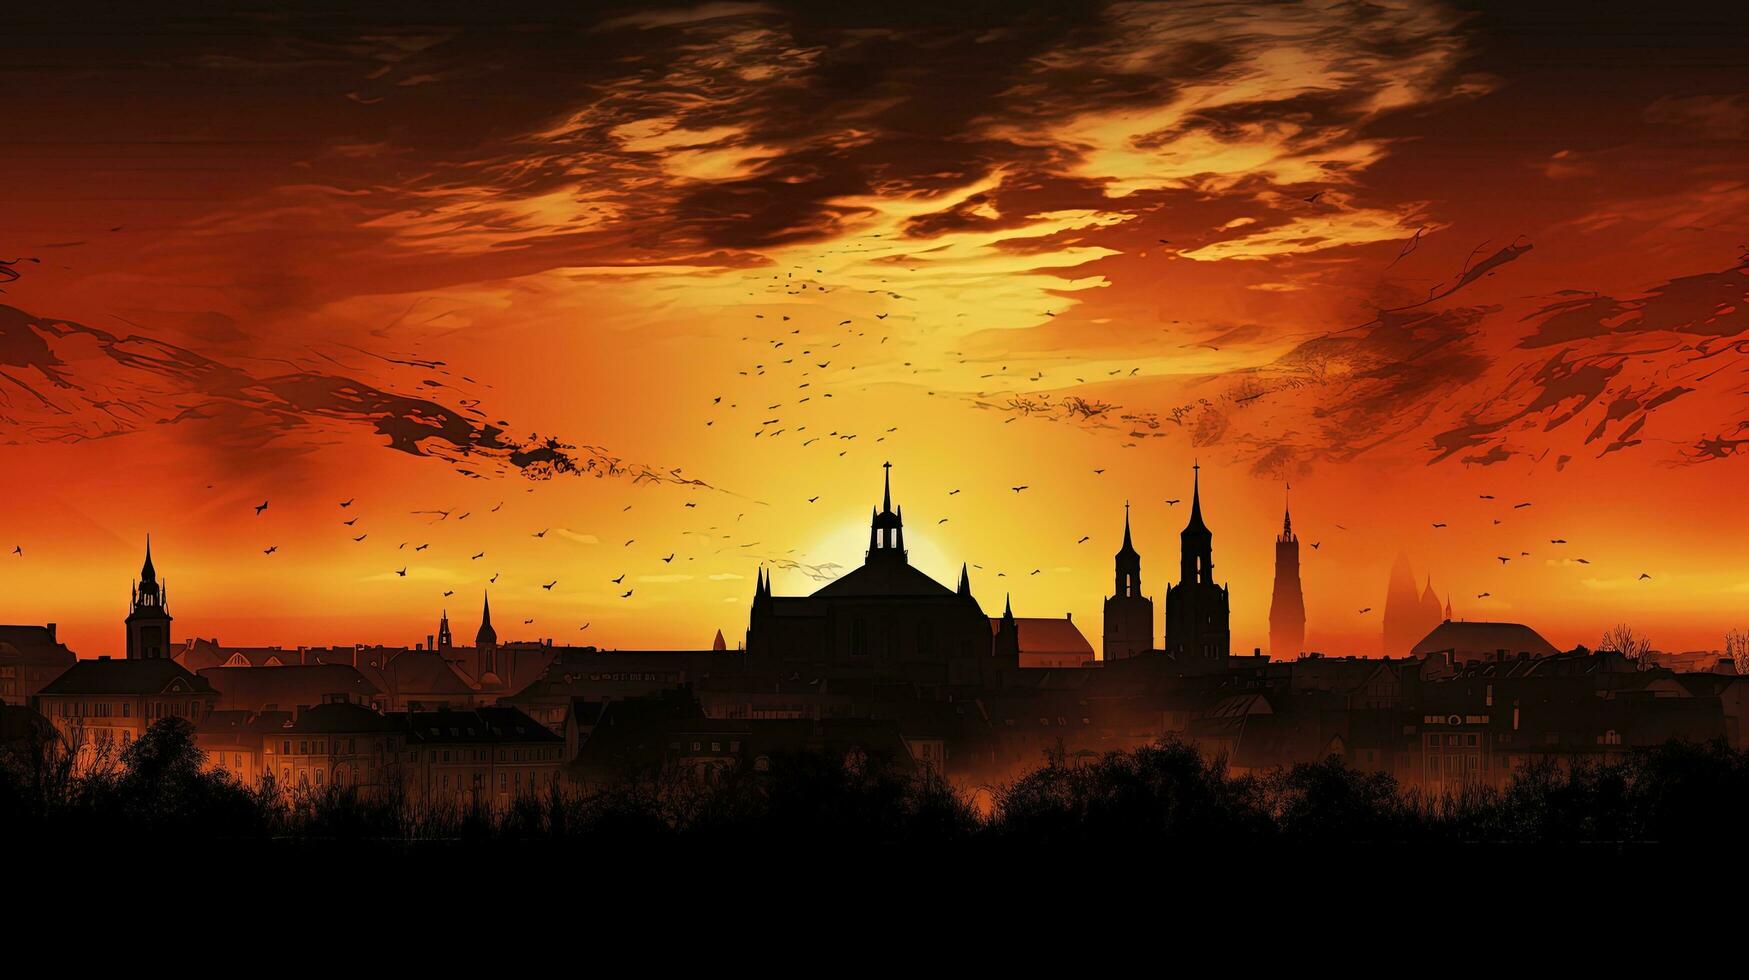 Silhouettes of churches in the Munich skyline against a fiery sunset photo